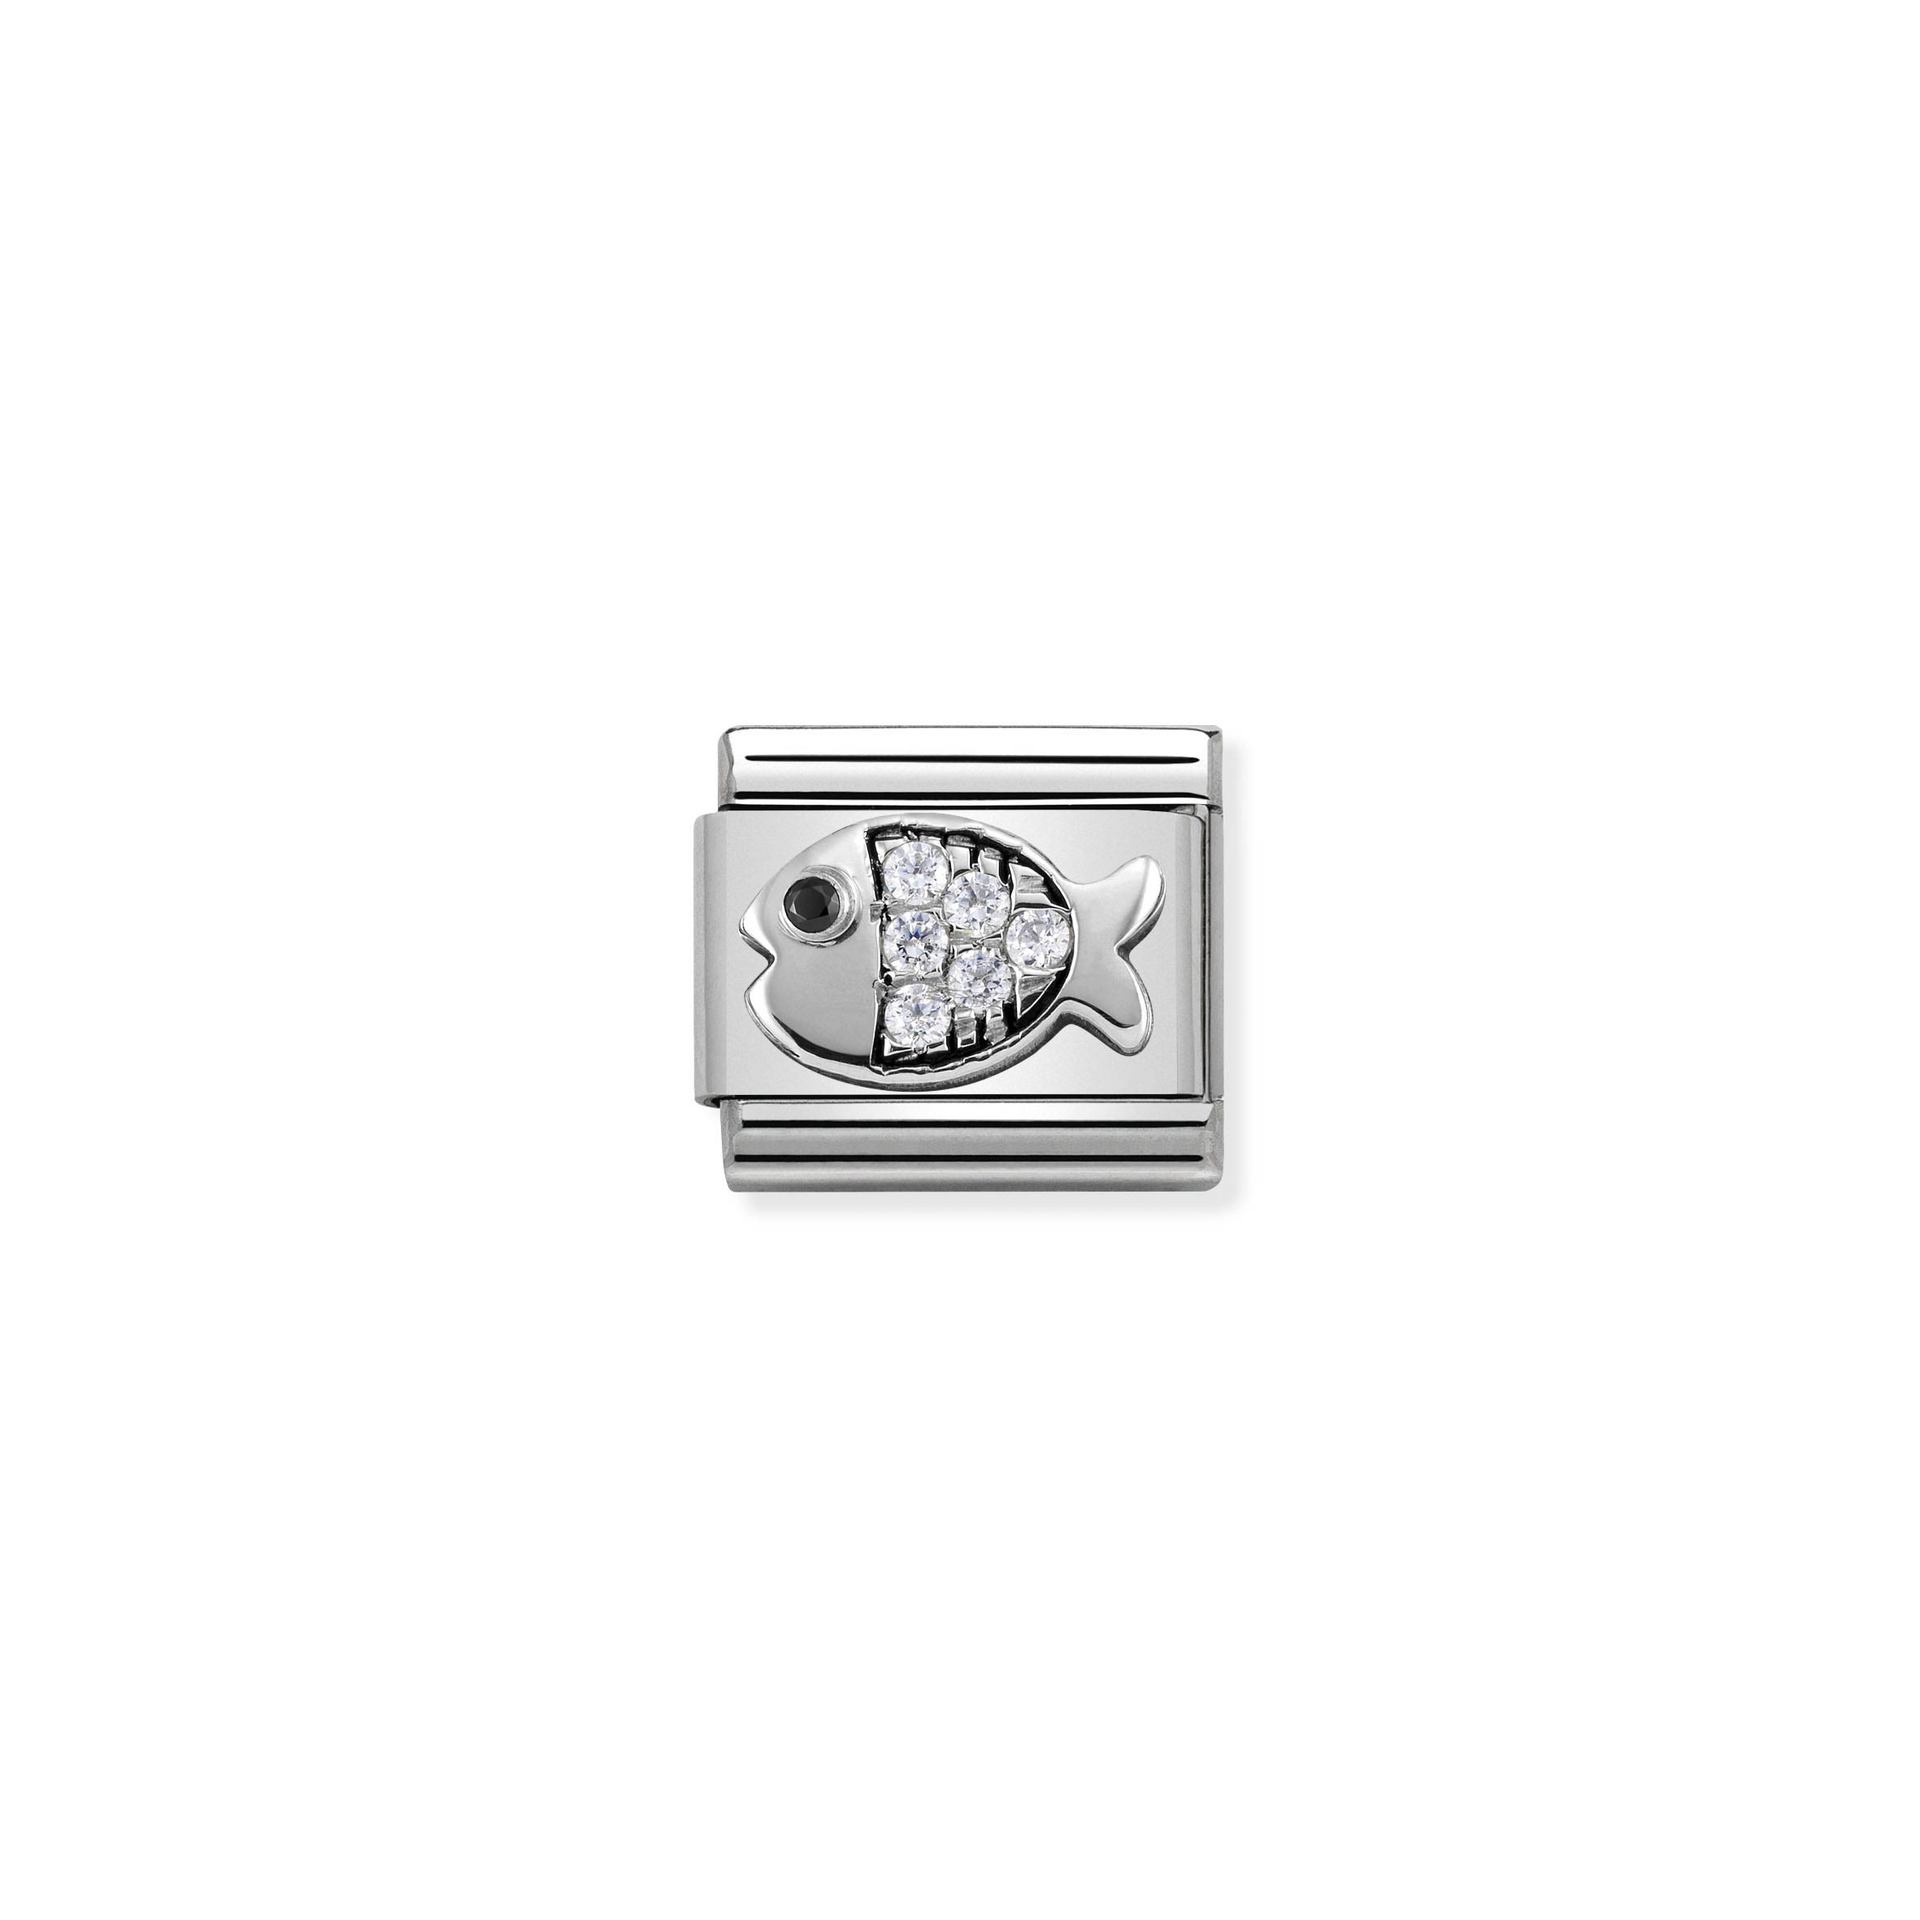 Nomination Composable Classic Fish Charm - Cubic Zirconia and Sterling Silver